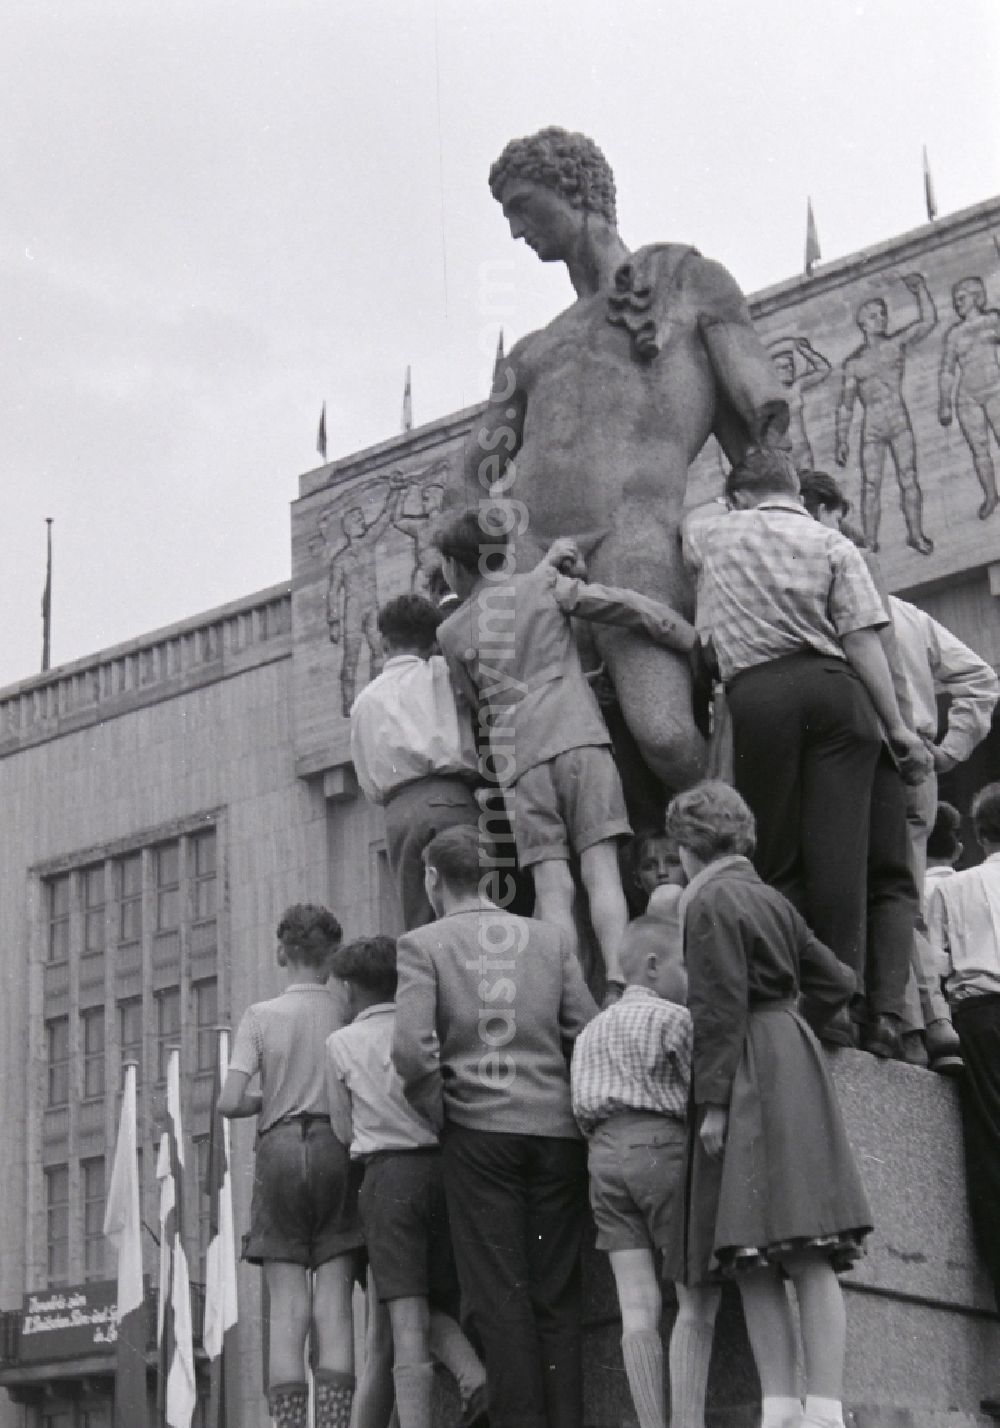 GDR photo archive: Berlin - Fun and games for children and teenagers in front of a stone sculpture in front of the Deutsche Sporthalle on Stalinallee - today's Karl-Marx-Allee in the district Friedrichshain in Berlin, the former capital of the GDR, German Democratic Republic